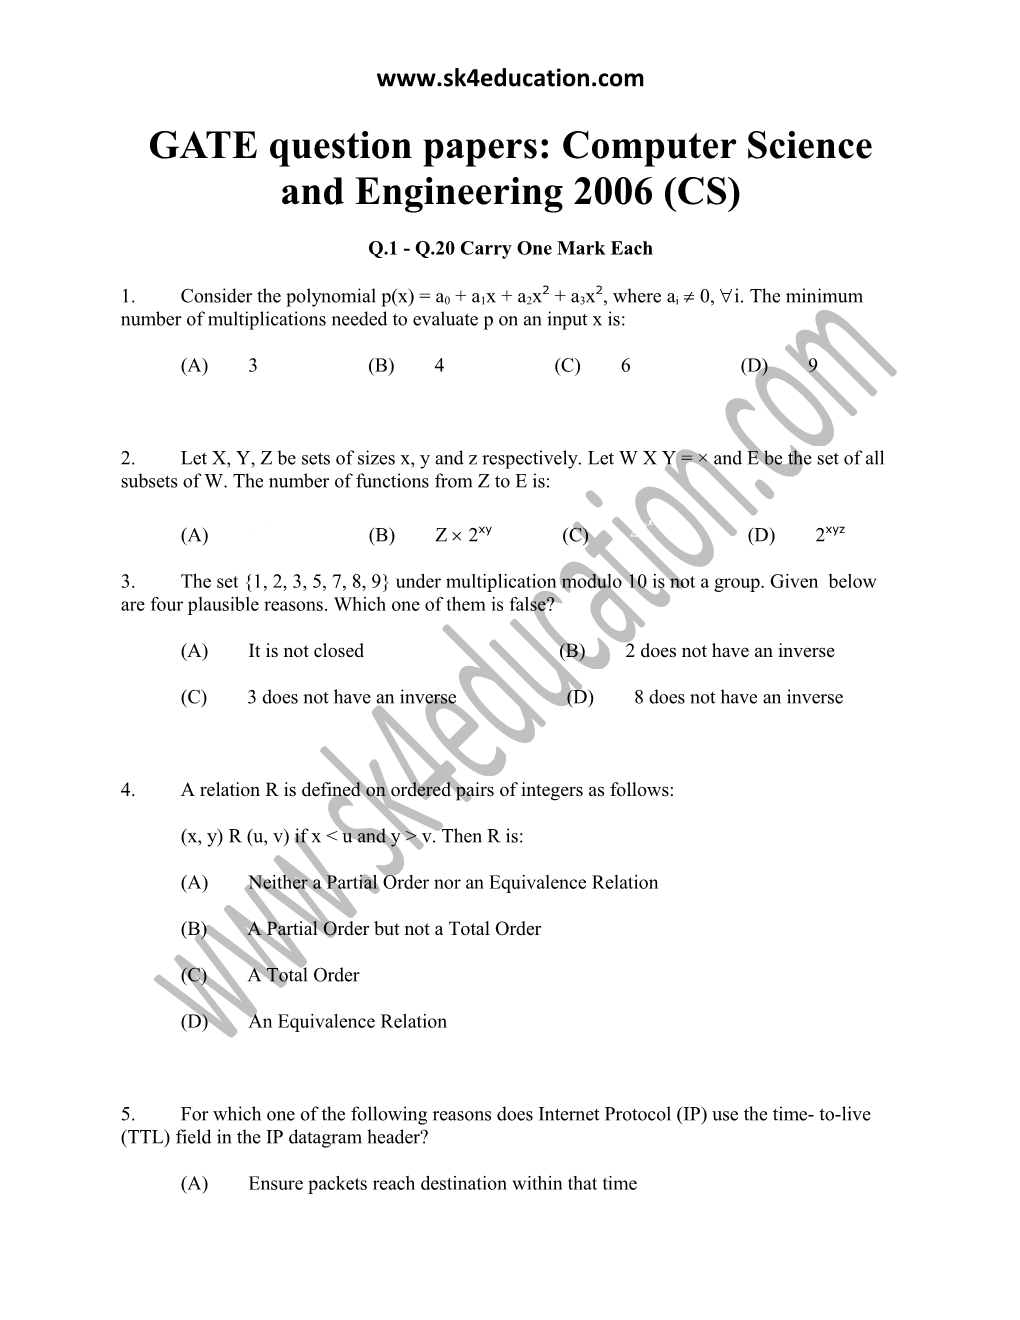 GATE Question Papers: Computer Science and Engineering 2006 (CS)